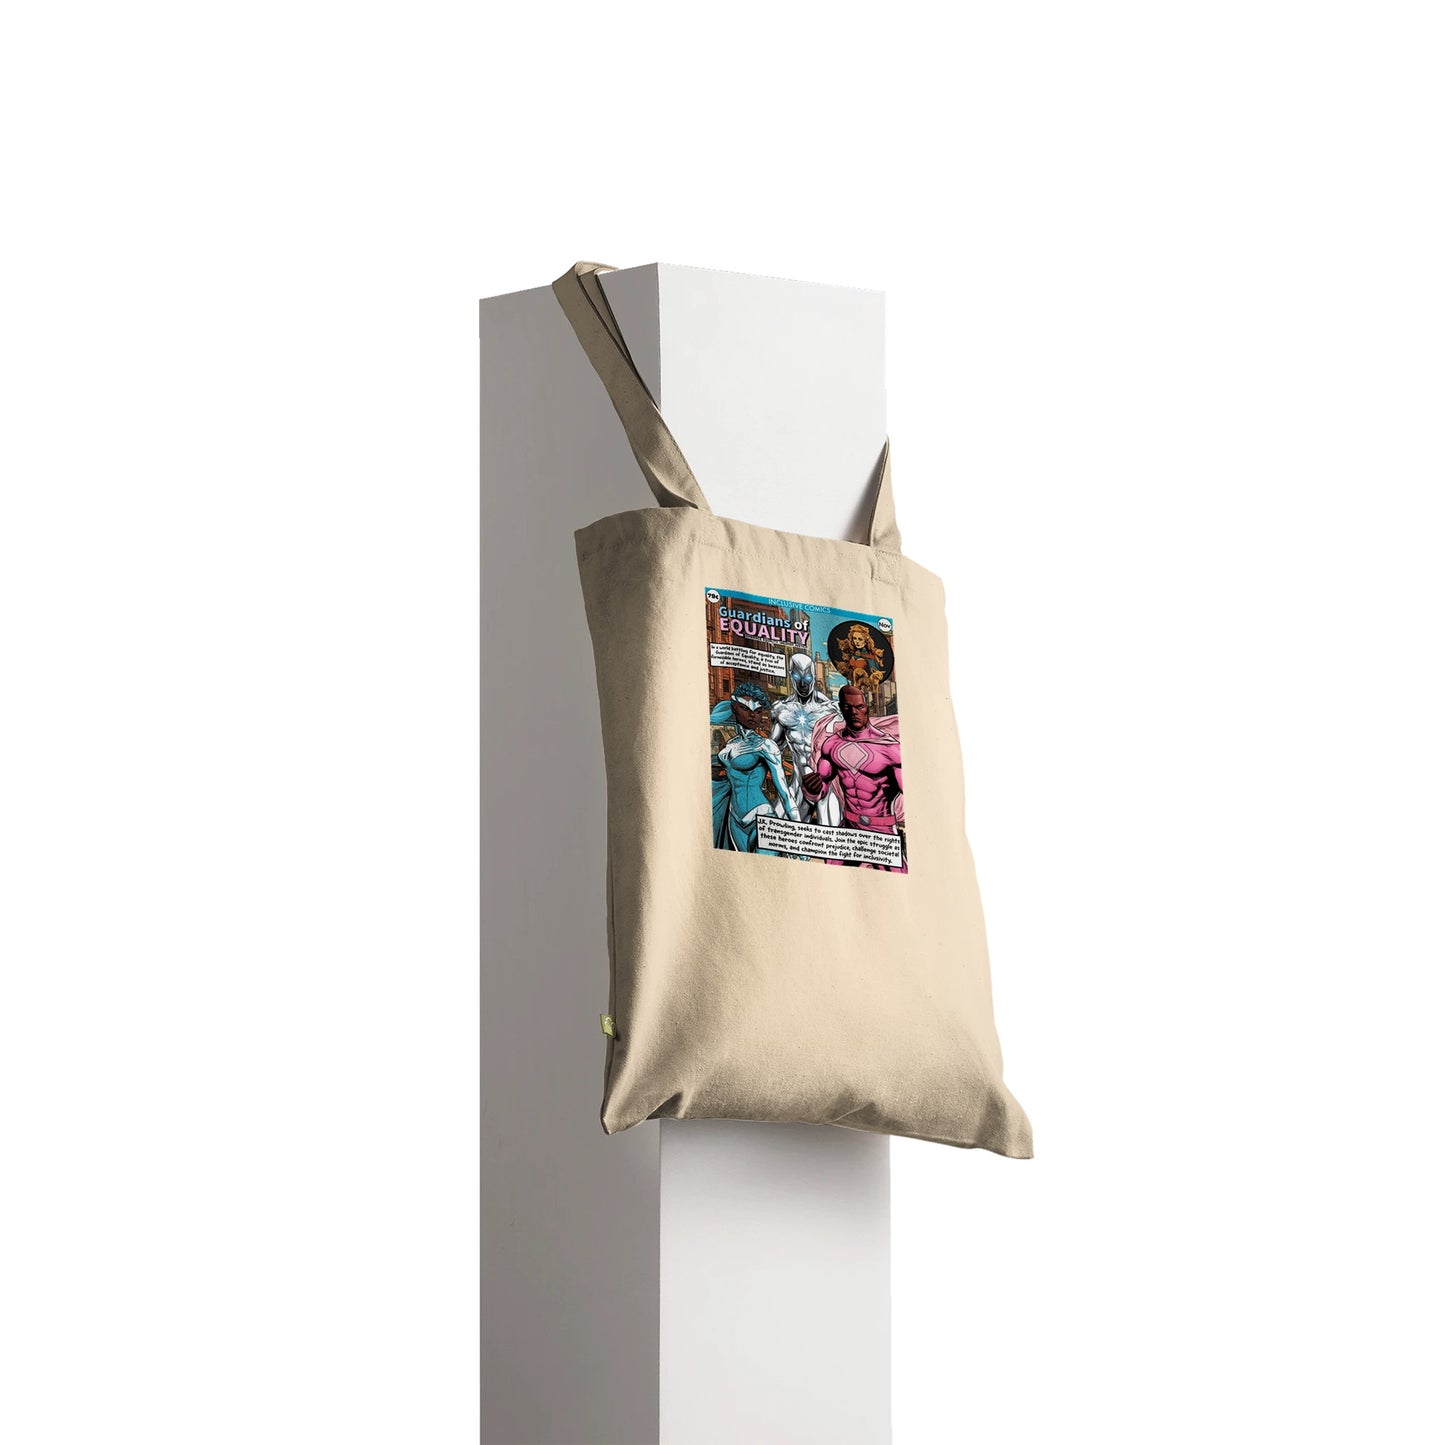 LGBTQIA+ | Guardians of Equality [Queer Super Heroes] | Eco Tote Bag